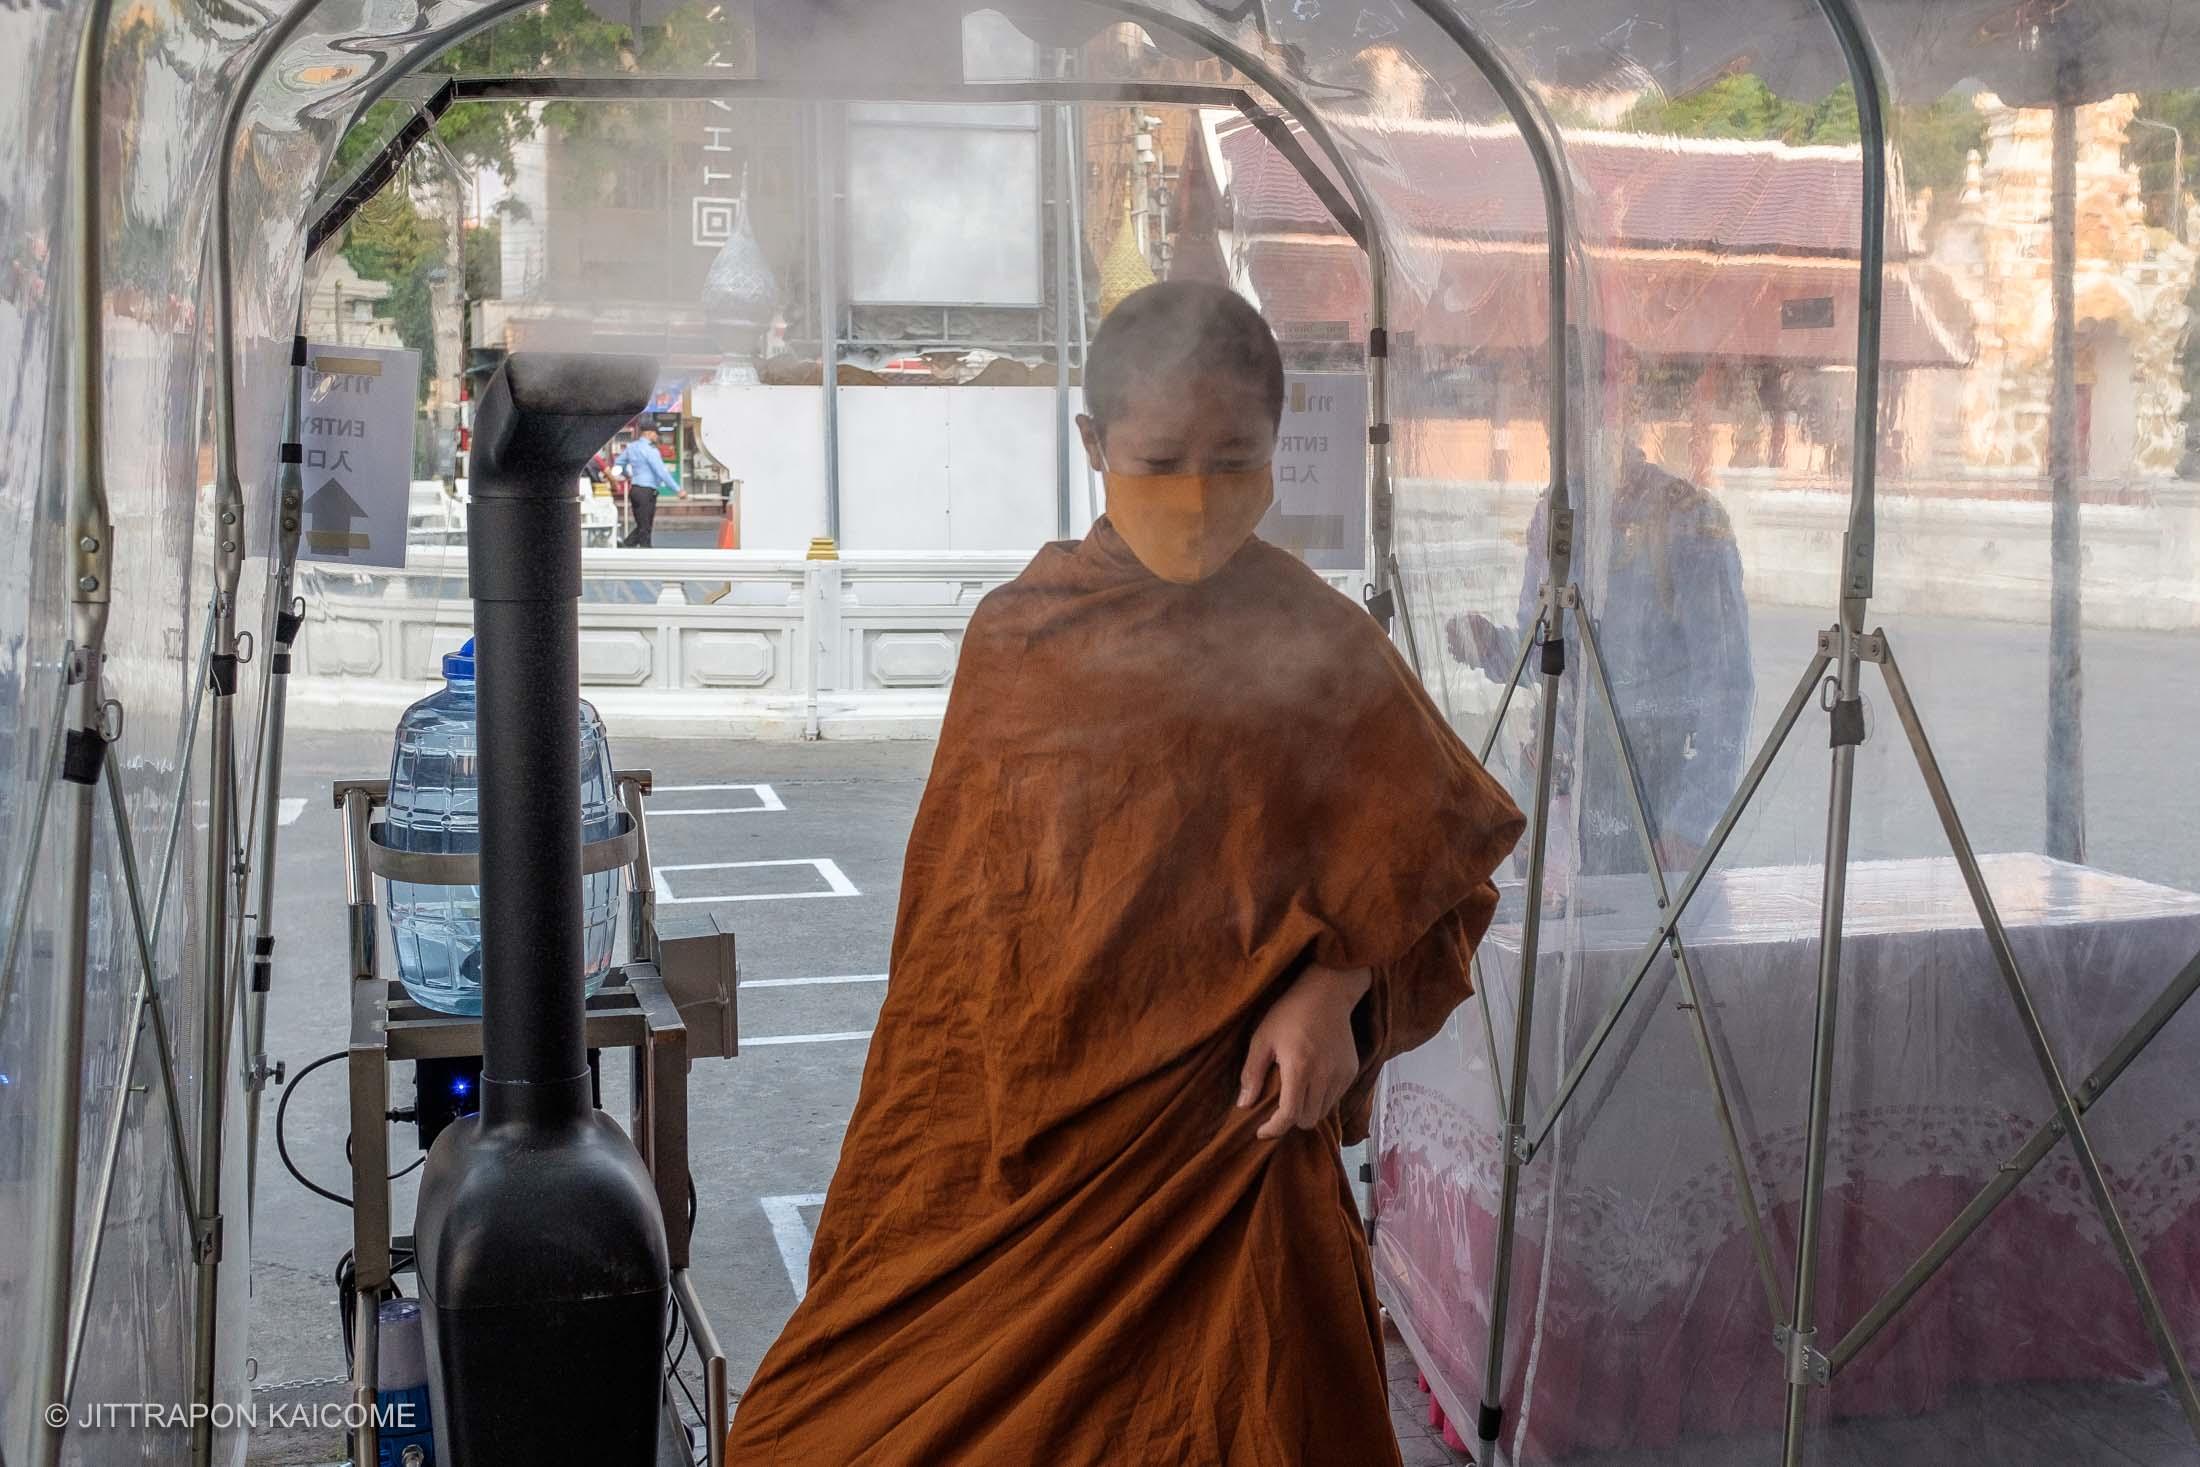 06.01 PM - Chedi Luang Temple is being strictly screened for COVID-19 and disinfection tunnel has been used as a weapon in the fight against the virus, Chiang Mai, Thailand, in March 30, 2020.